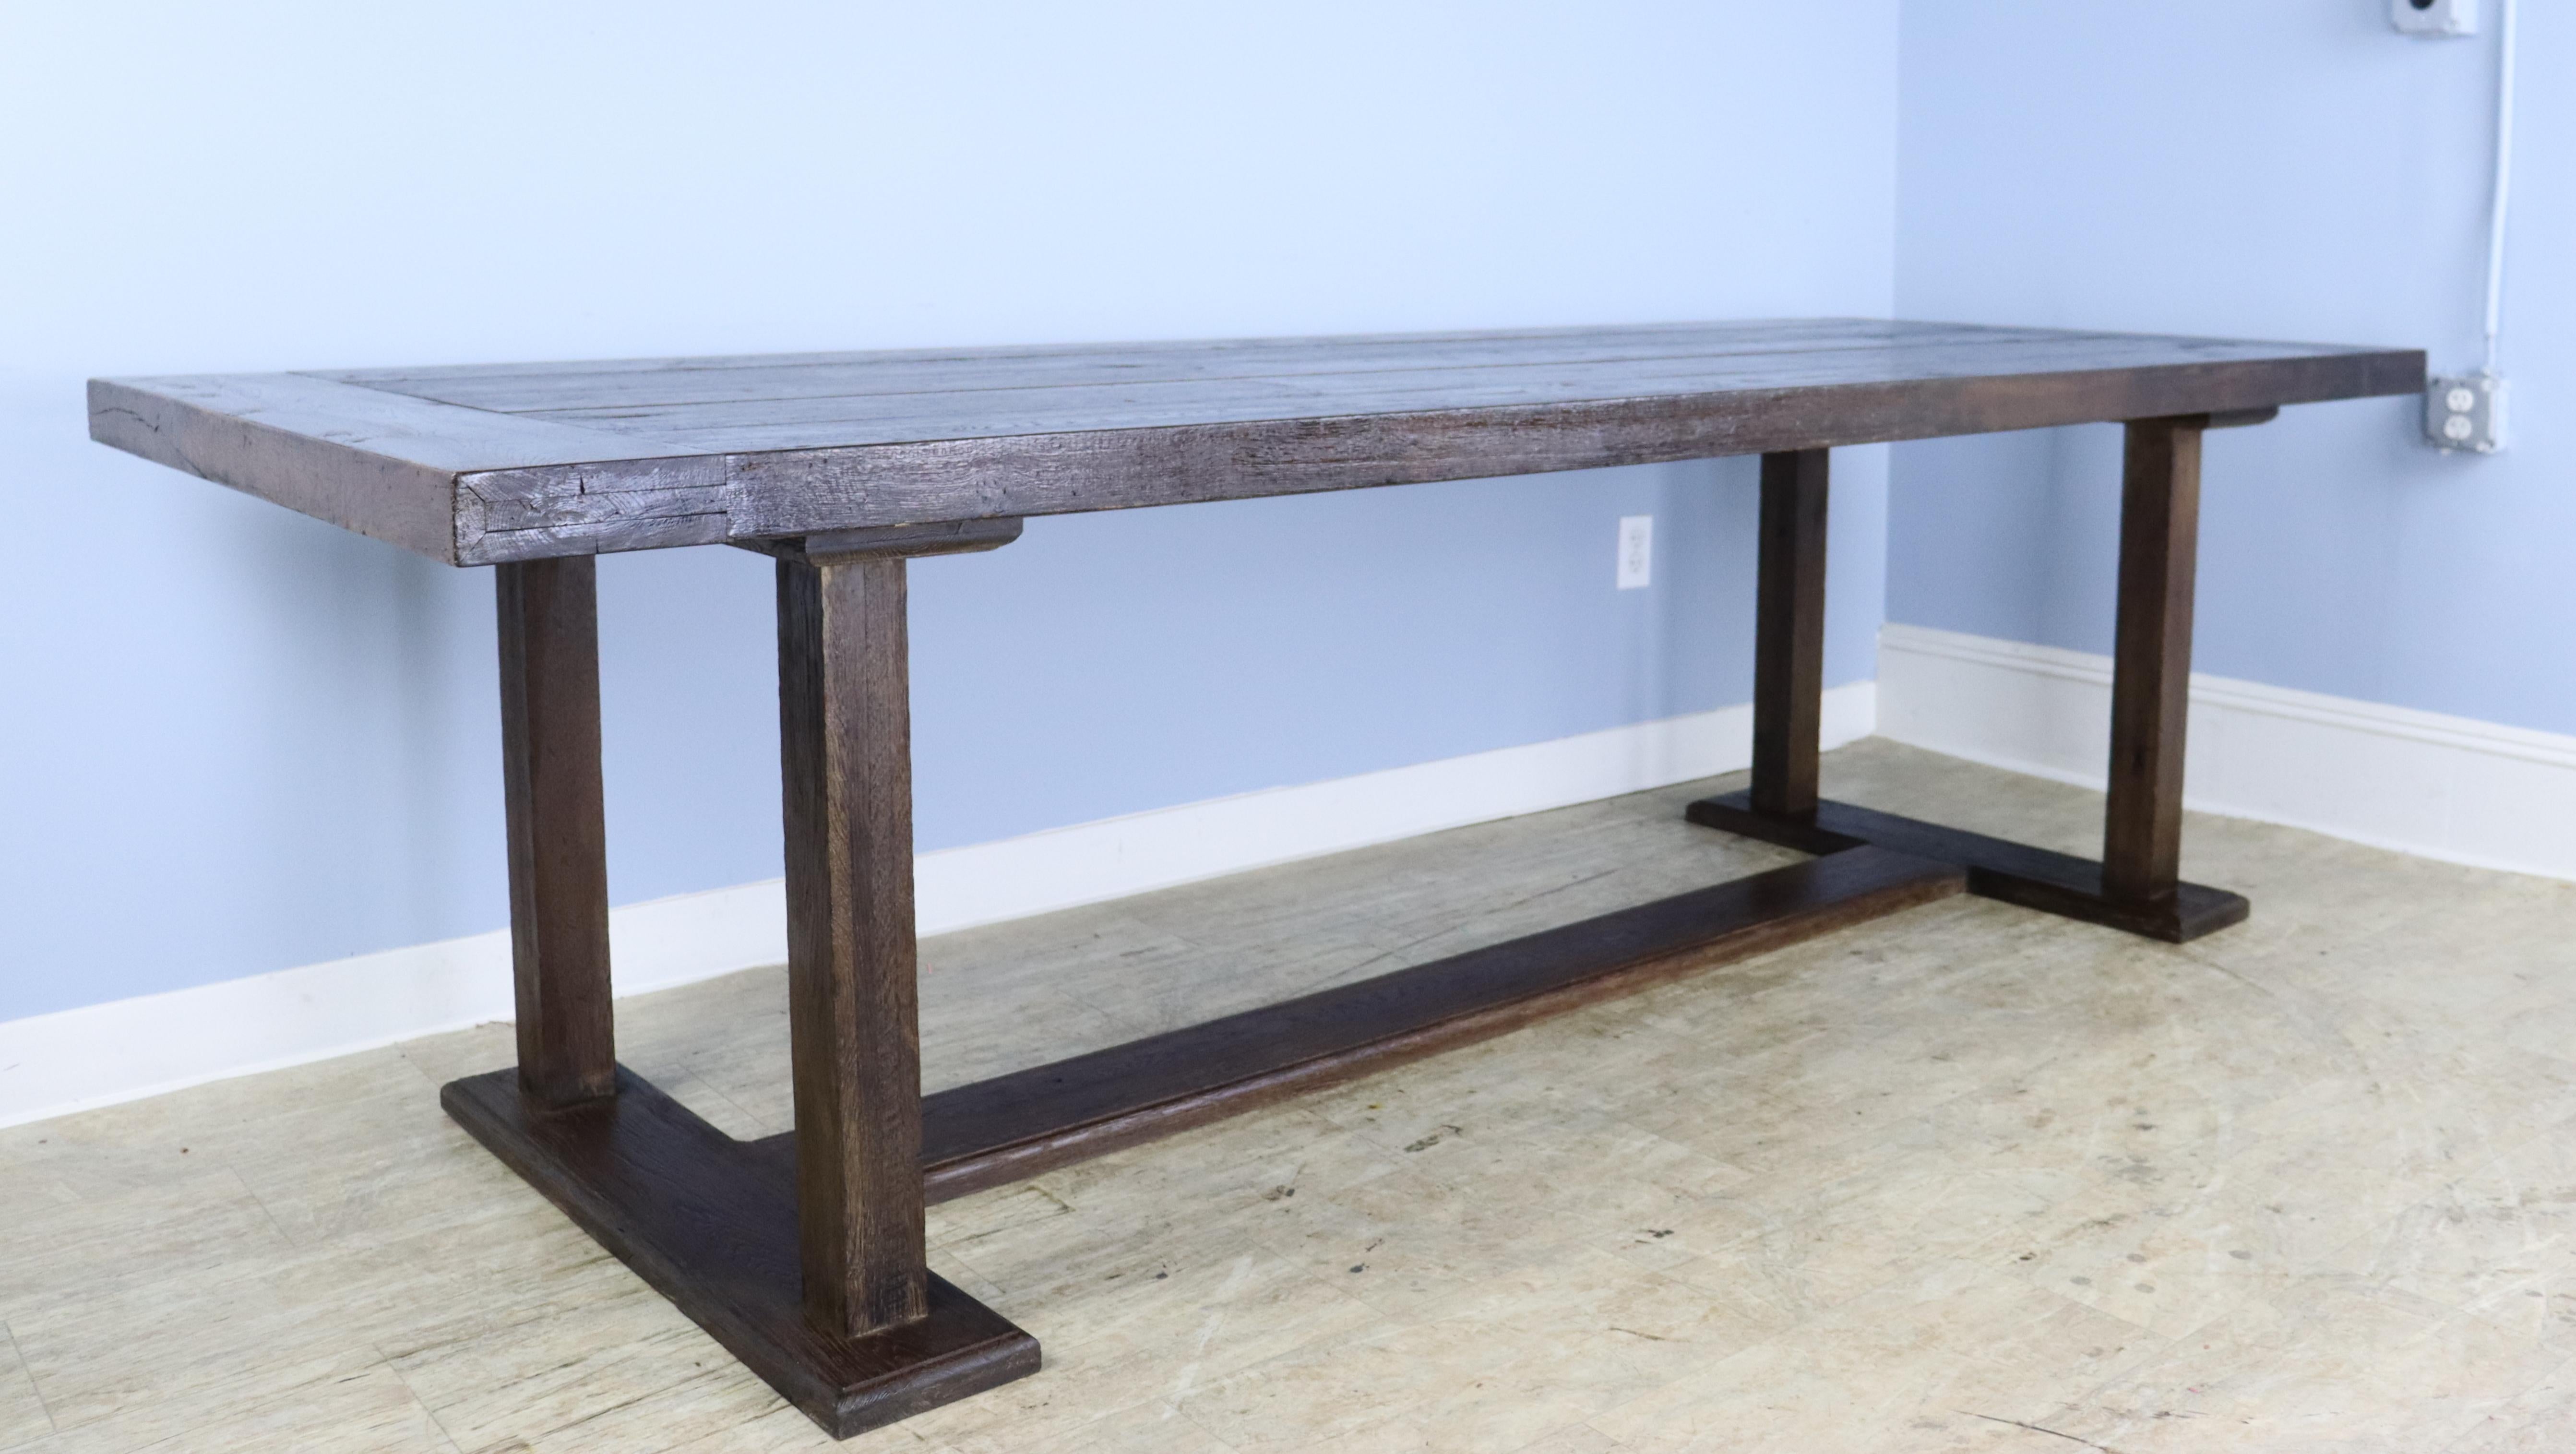 A generously proportioned long dark farm table with a stretcher base and a patinated topwith breadboard ends. The top has good chestnut texture, and the trestled legs at the base add a note of grandeur. Great depth. The apron height is good for